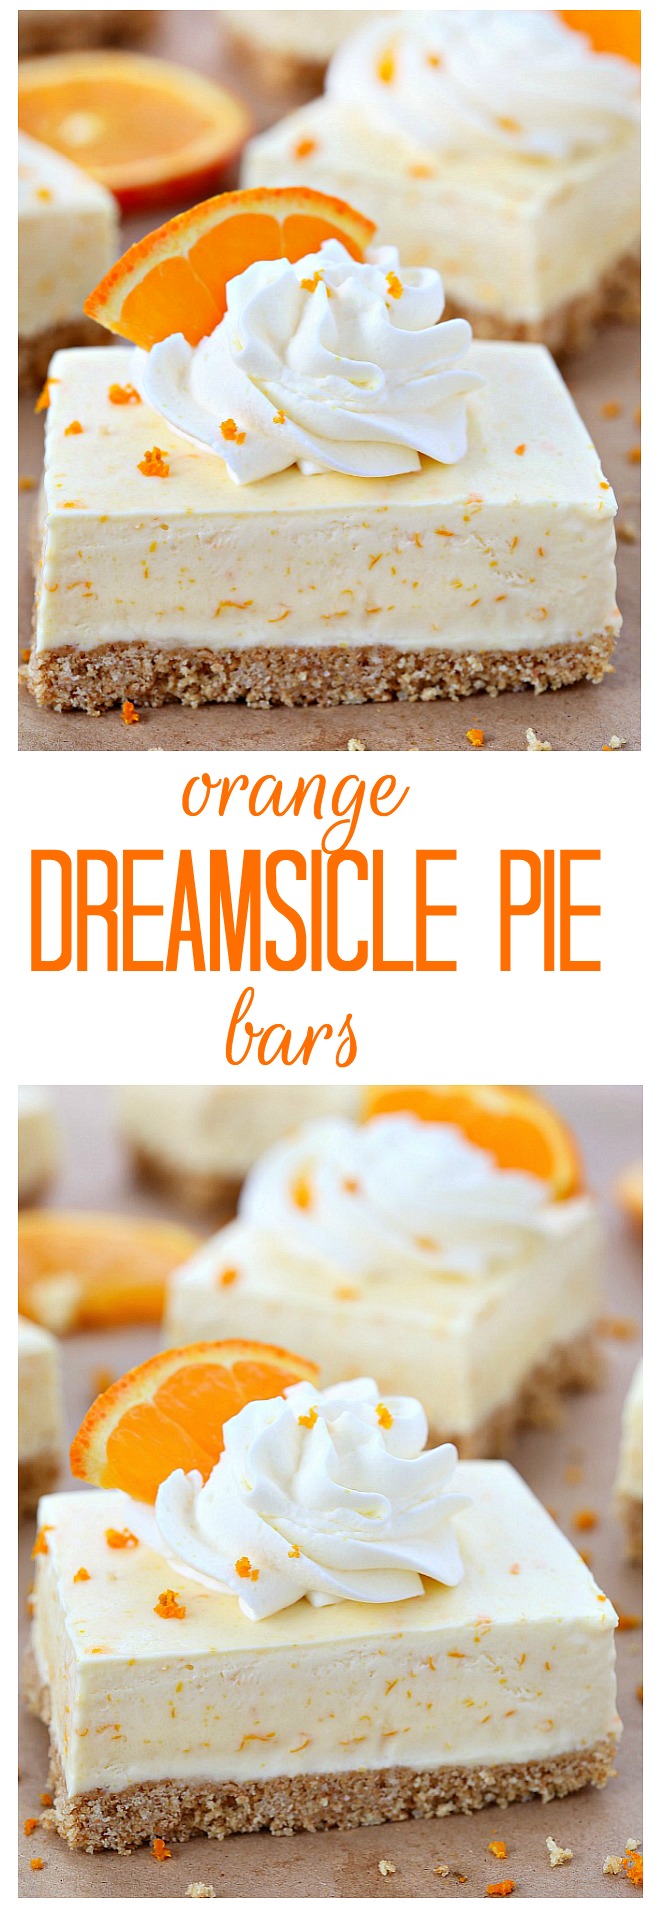 Summer in a bite, these orange dreamsicle pie bars are packed with orange flavor from freshly squeezed orange juice and grated orange rind! Forget the orange flavored jello, these orange dreamsicle pie bars taste so much better!